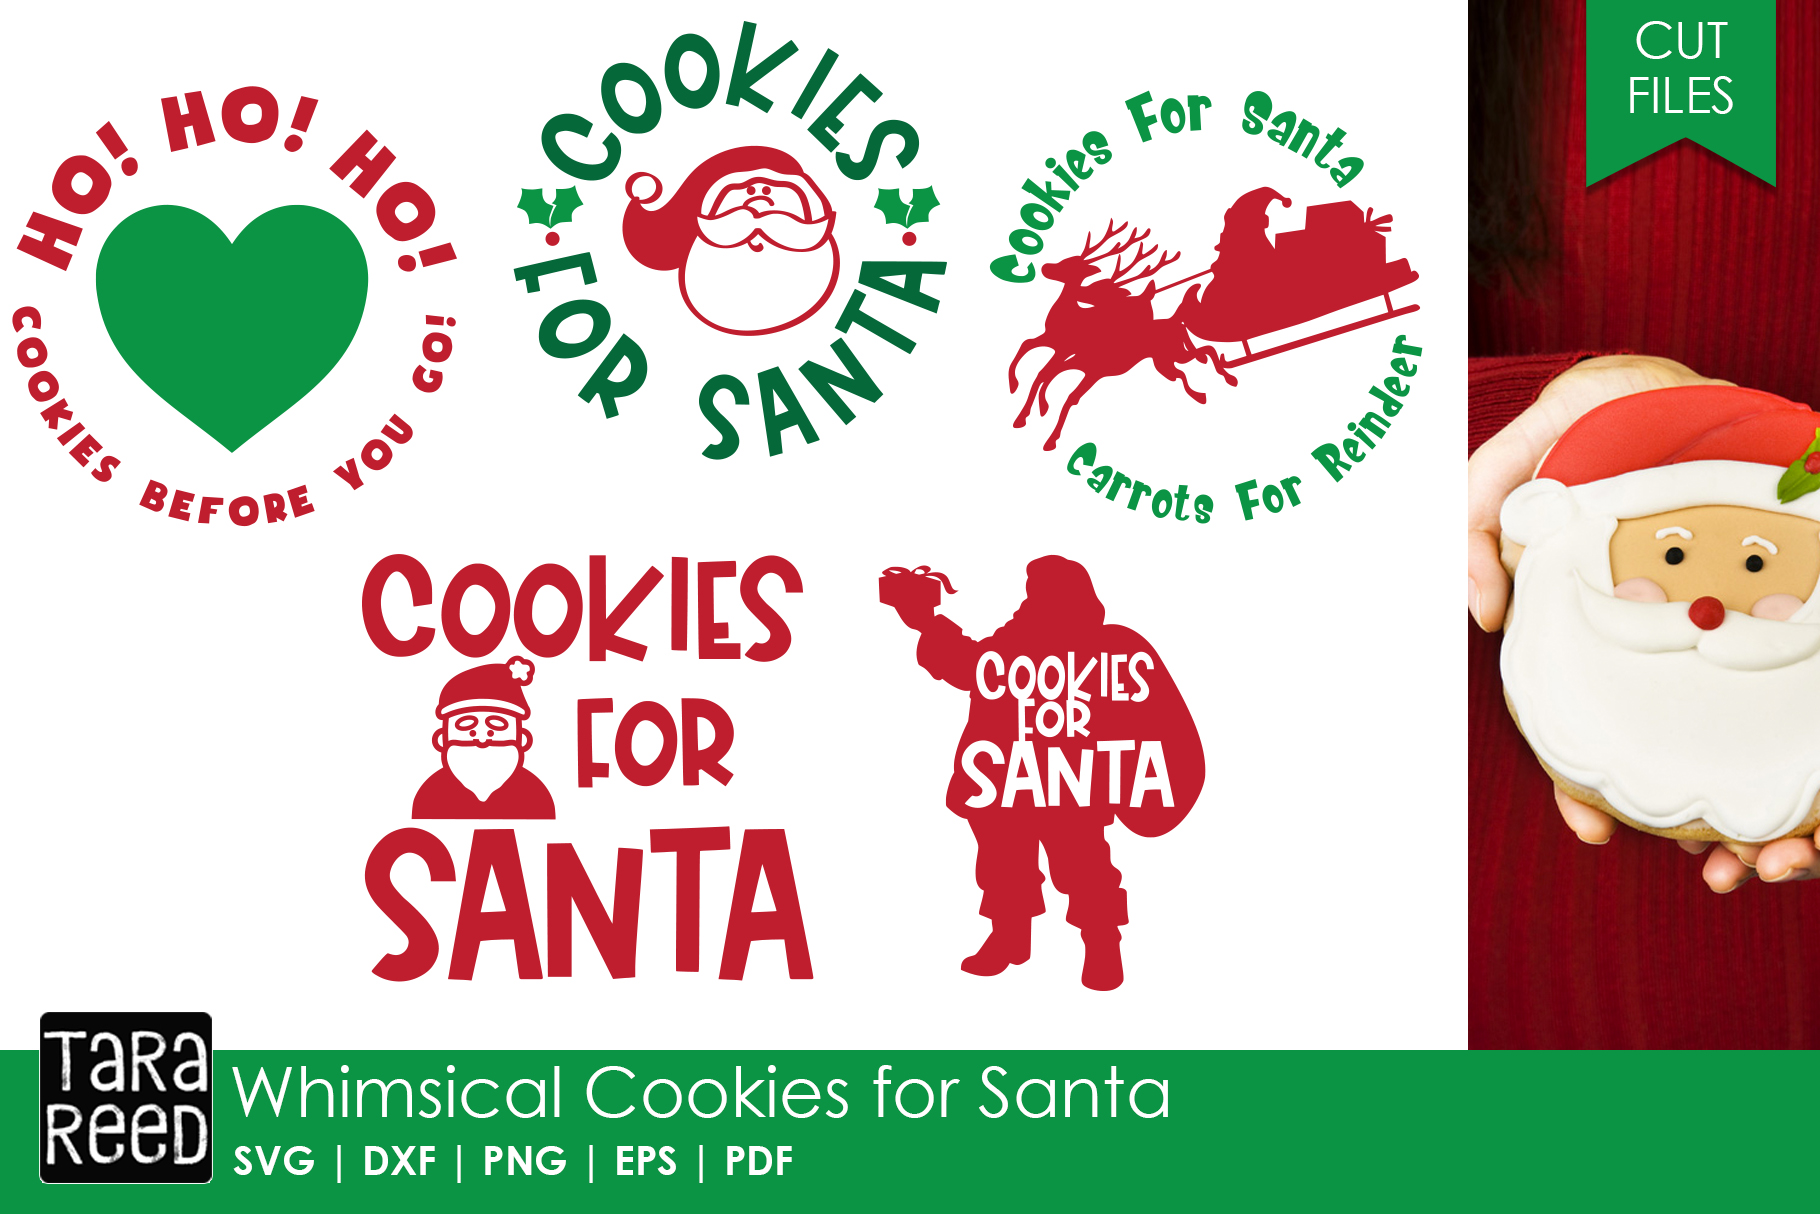 Download Whimsical Cookies for Santa - Christmas SVG Files